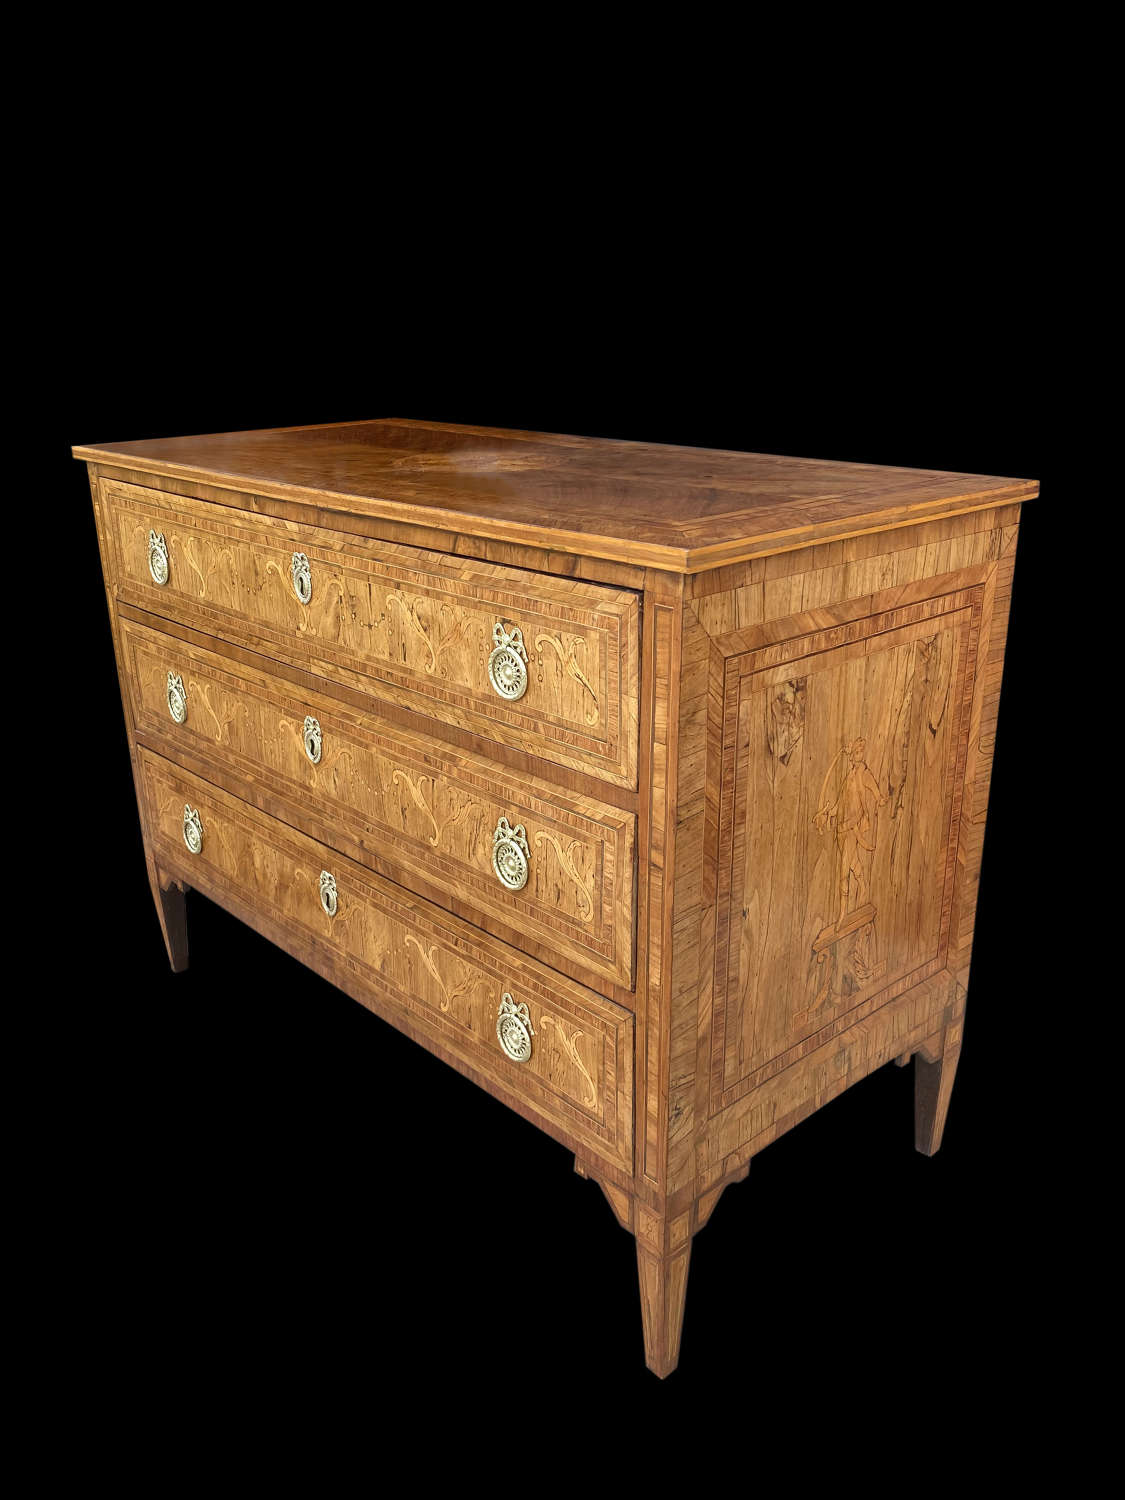 A LATE 18TH CENTURY MARQUETRY COMMODE. ITALY C 1790